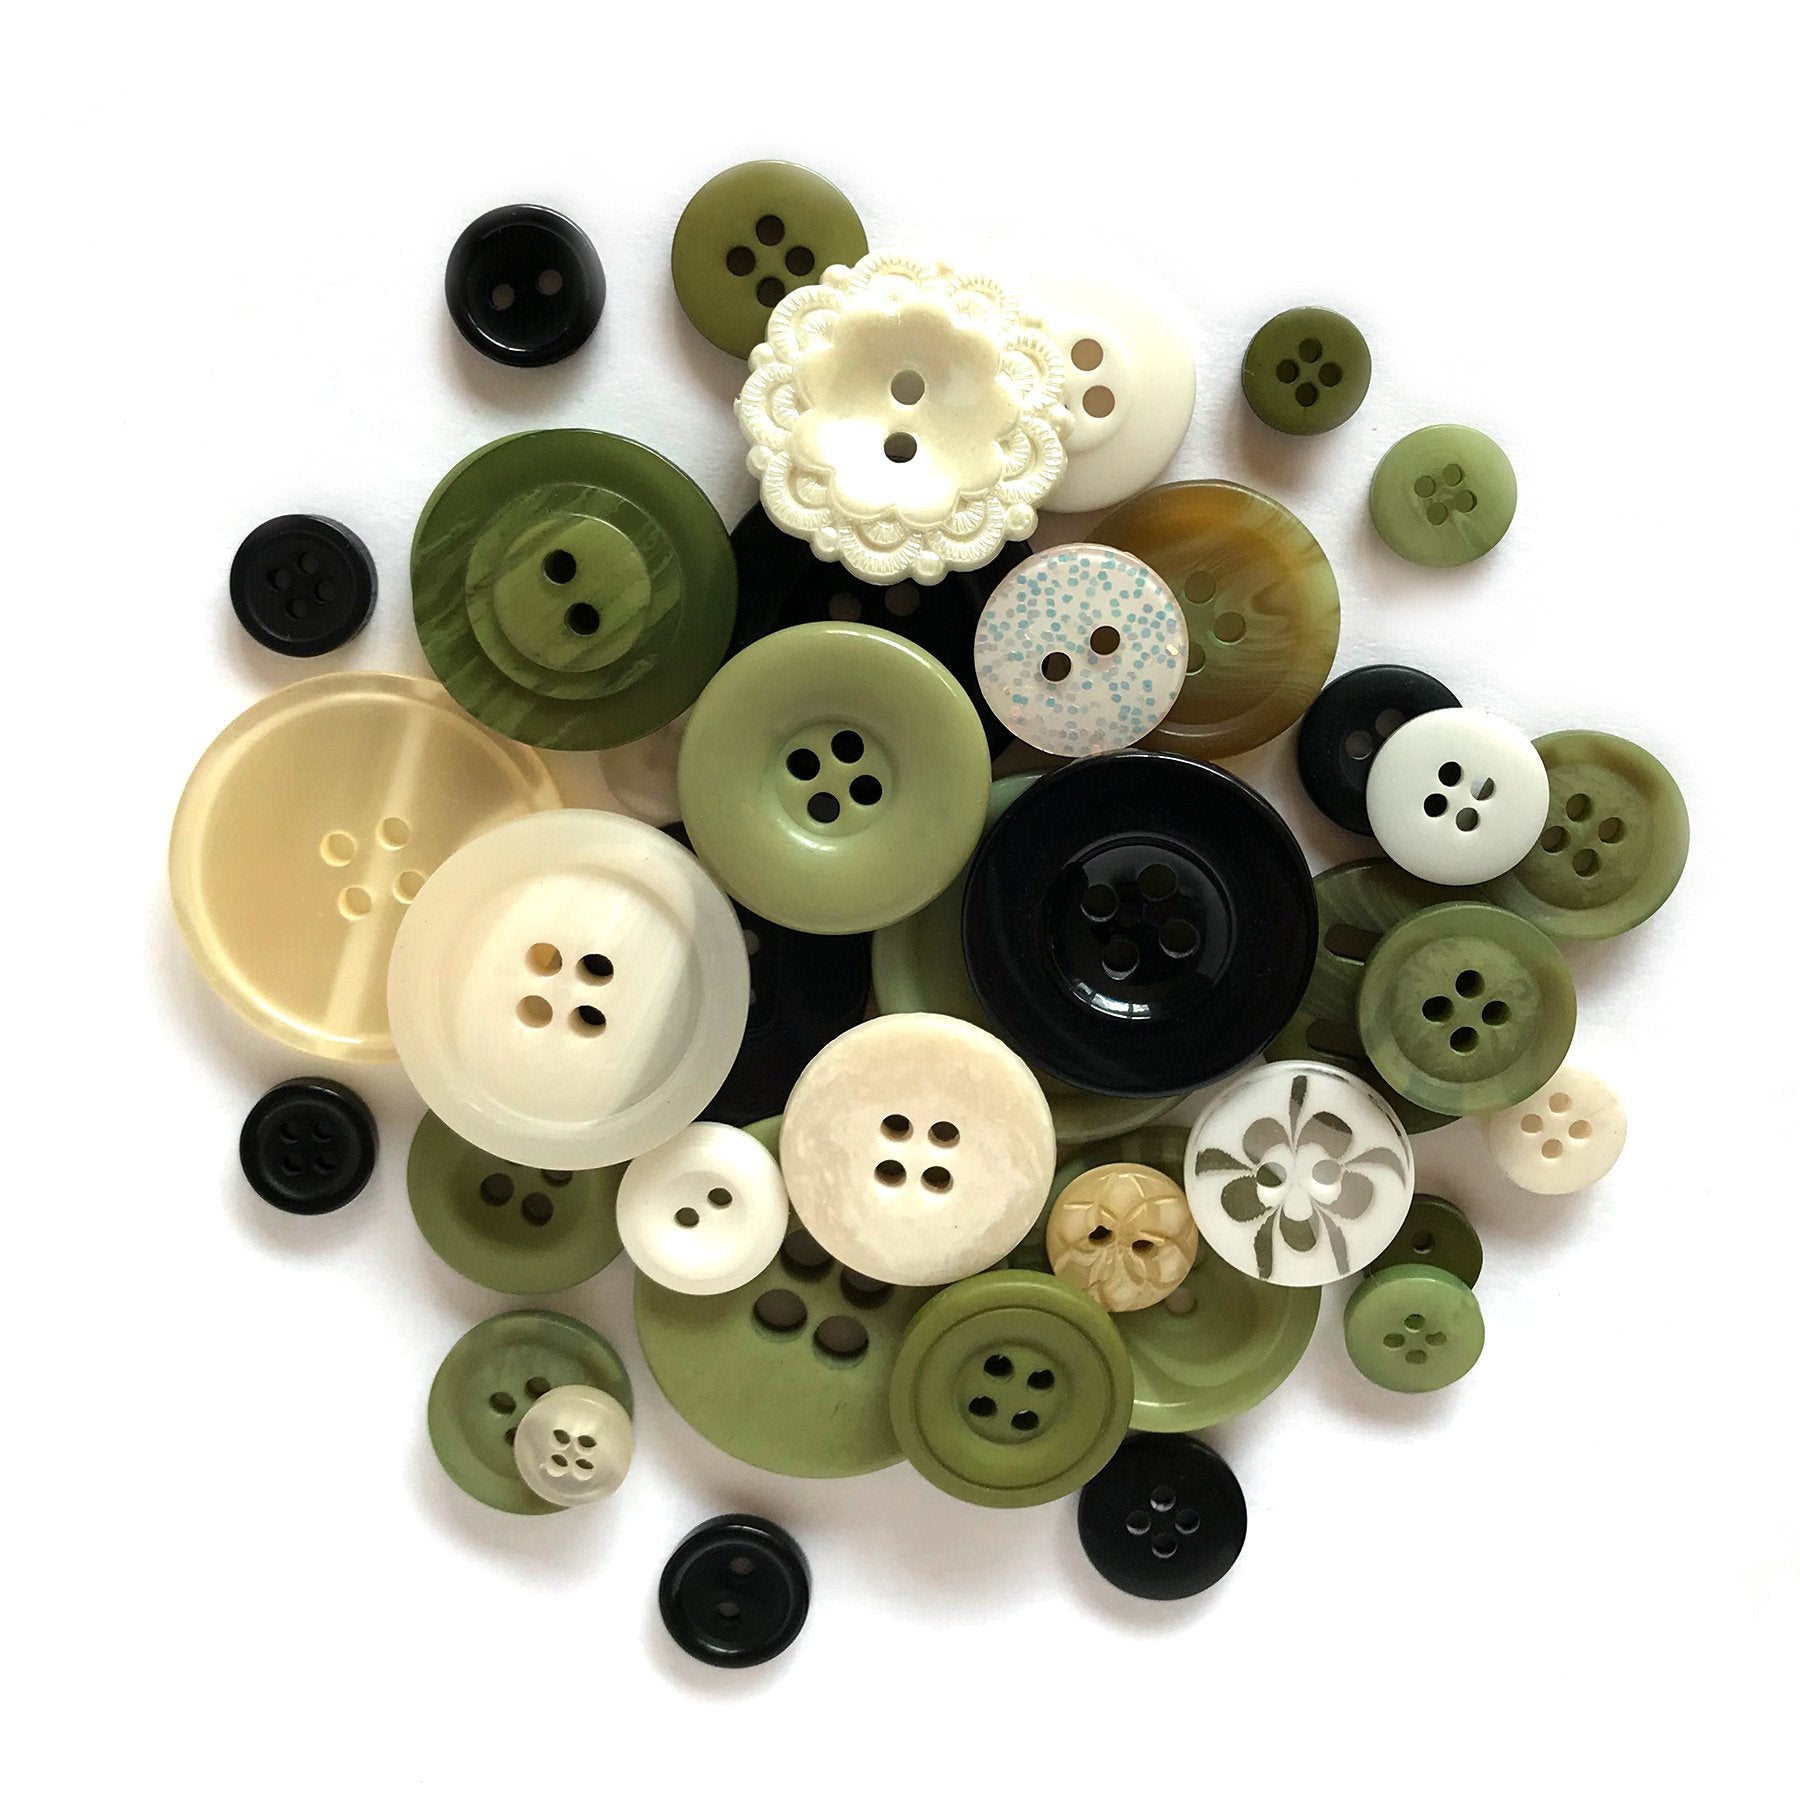 Camouflage-GB134 - Buttons Galore and More